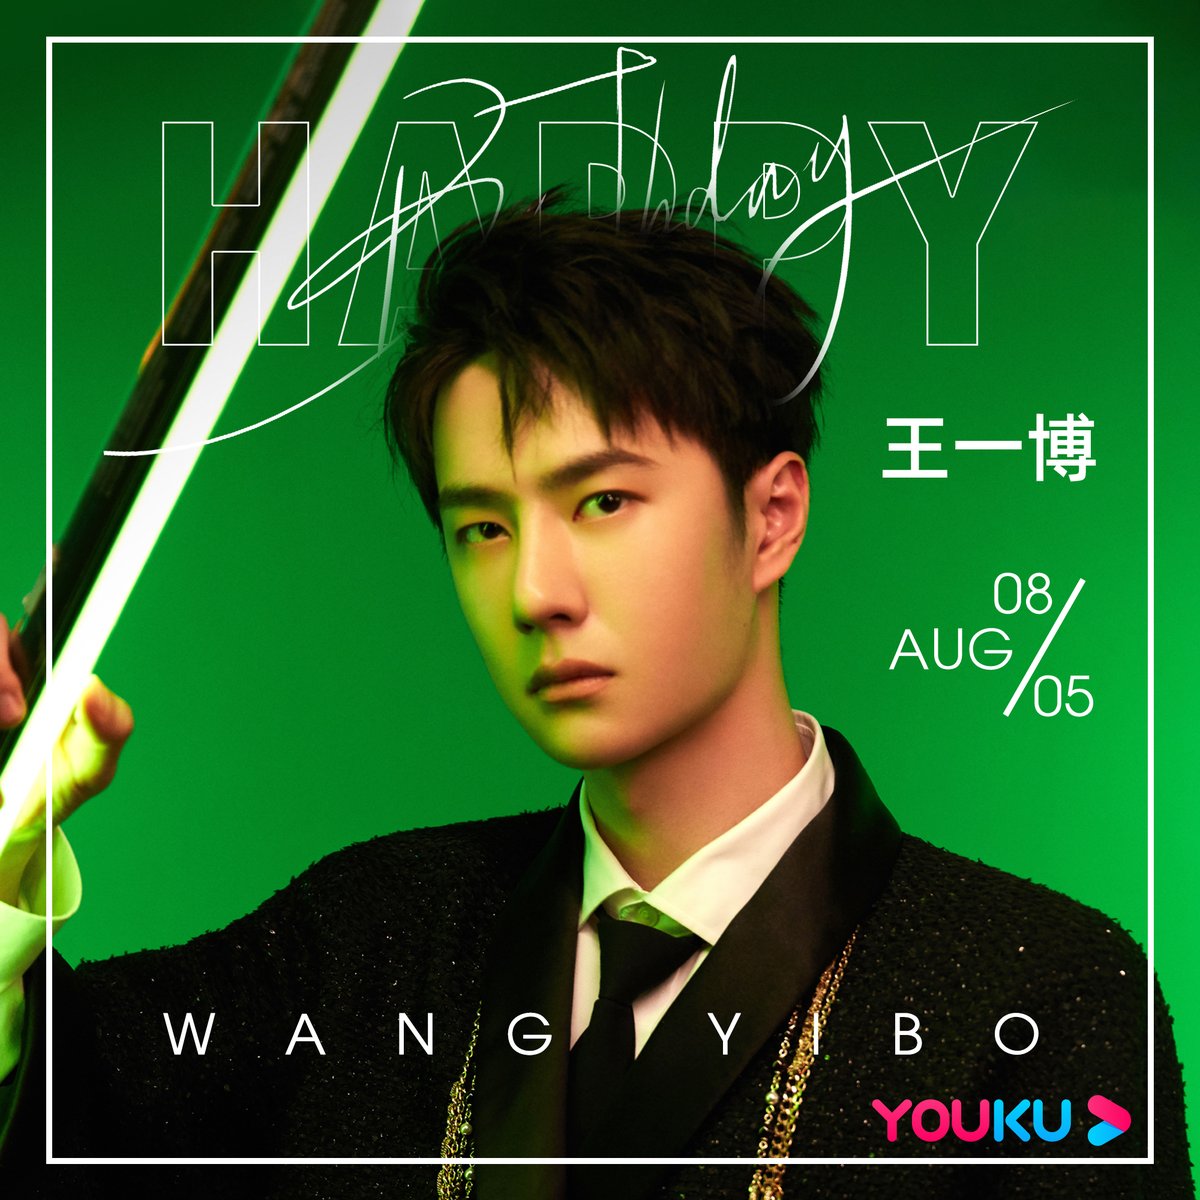 Flowers accompany all your way, winning thousands of joys.
You are the cool guy leader in #StreetDanceOfChina , and always love the stage. 
Hope you keep real and follow your heart!
Happy Birthday to #WangYiBo! 
#王一博0805生日快乐
#YOUKUSHOW #优酷综艺